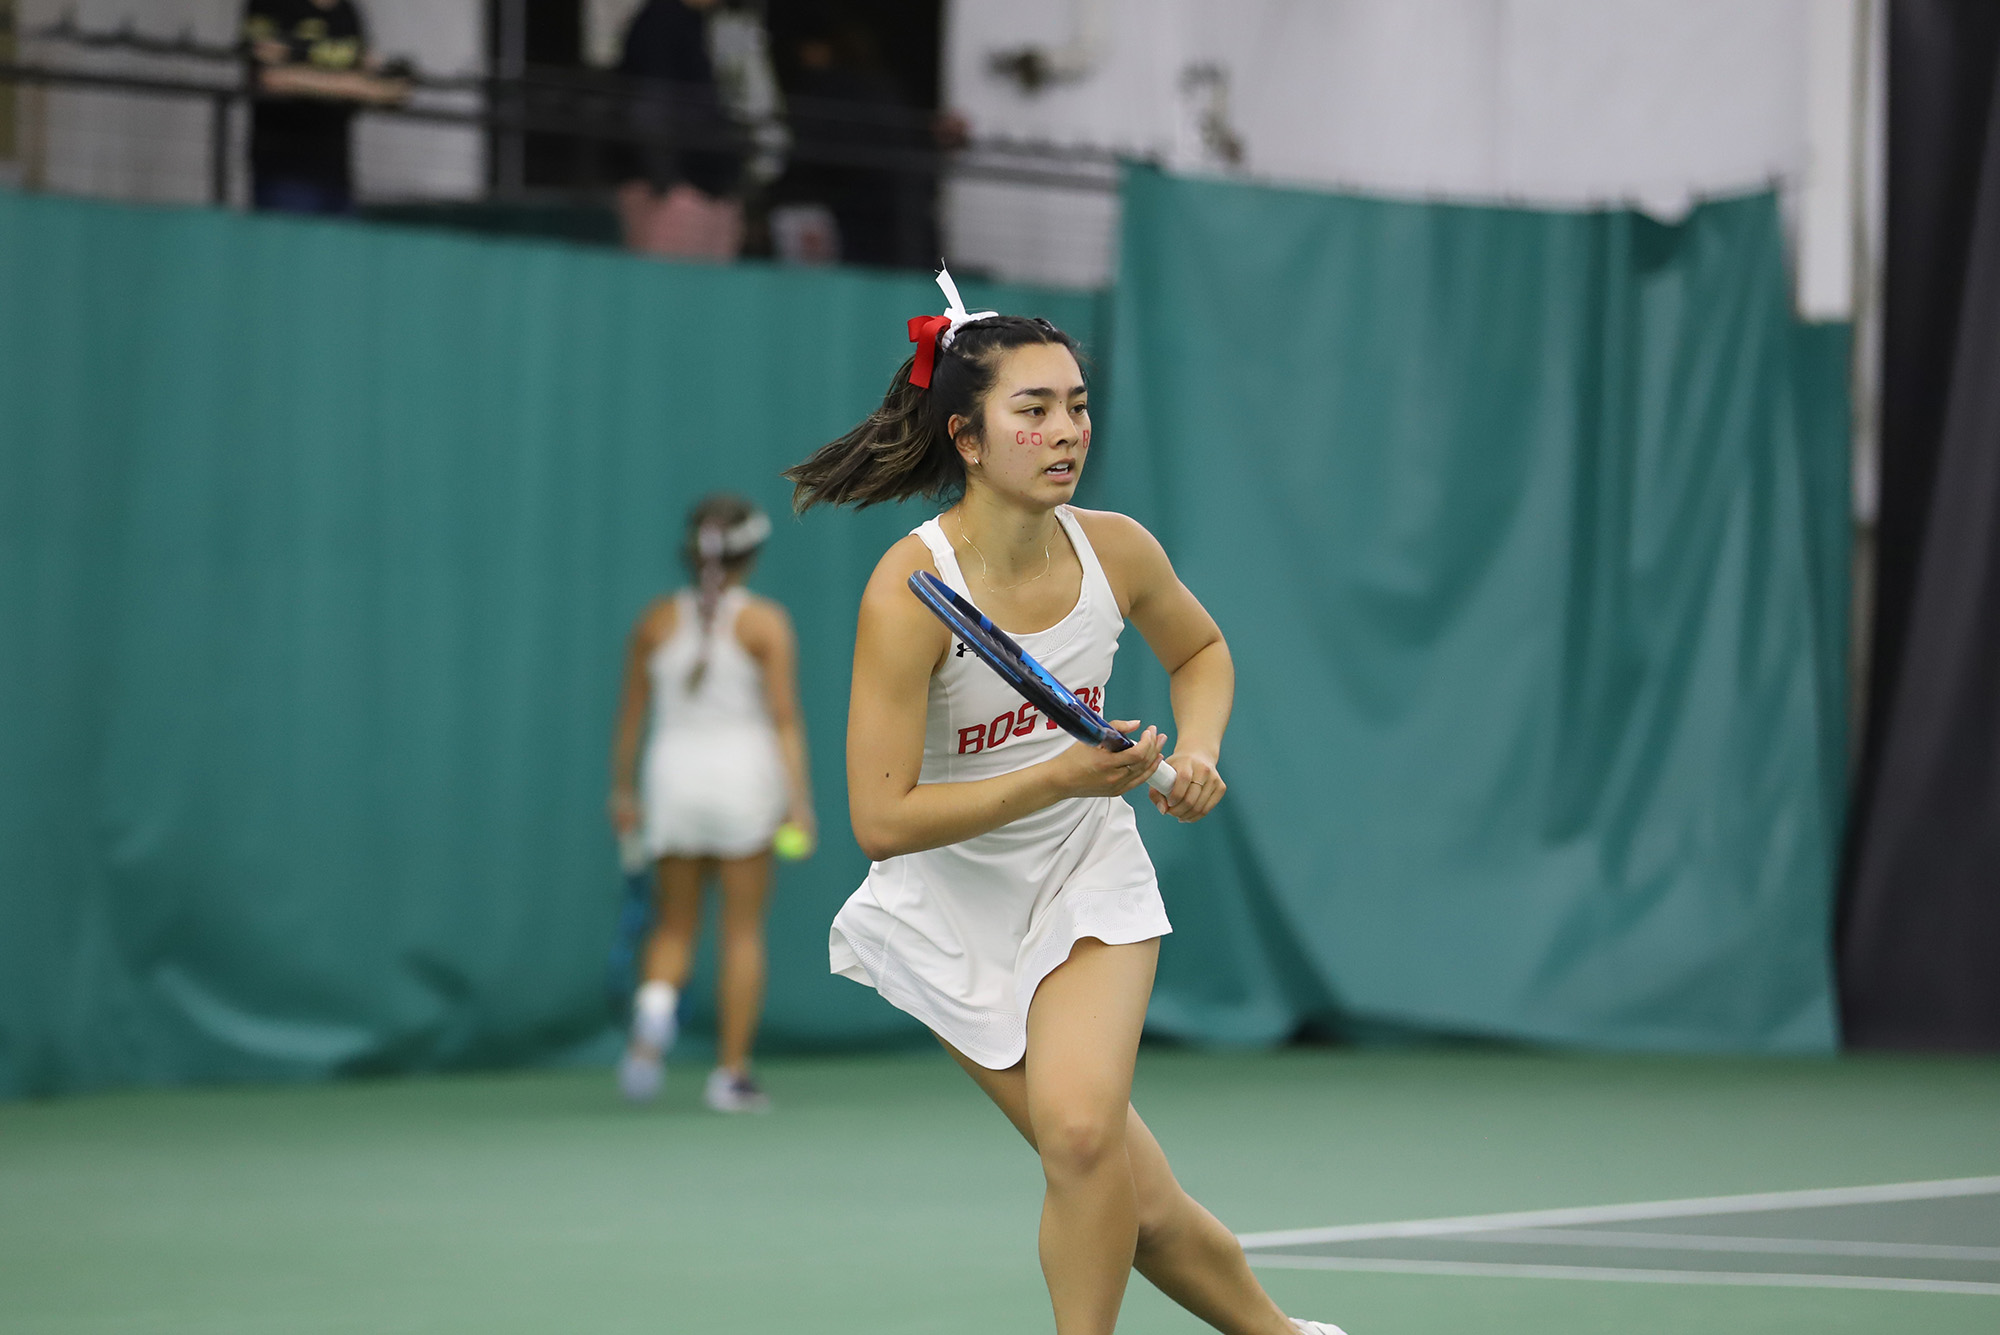 Photo: A women's tennis player in a white outfit runs towards the ball in a recent match, with racquet in hand